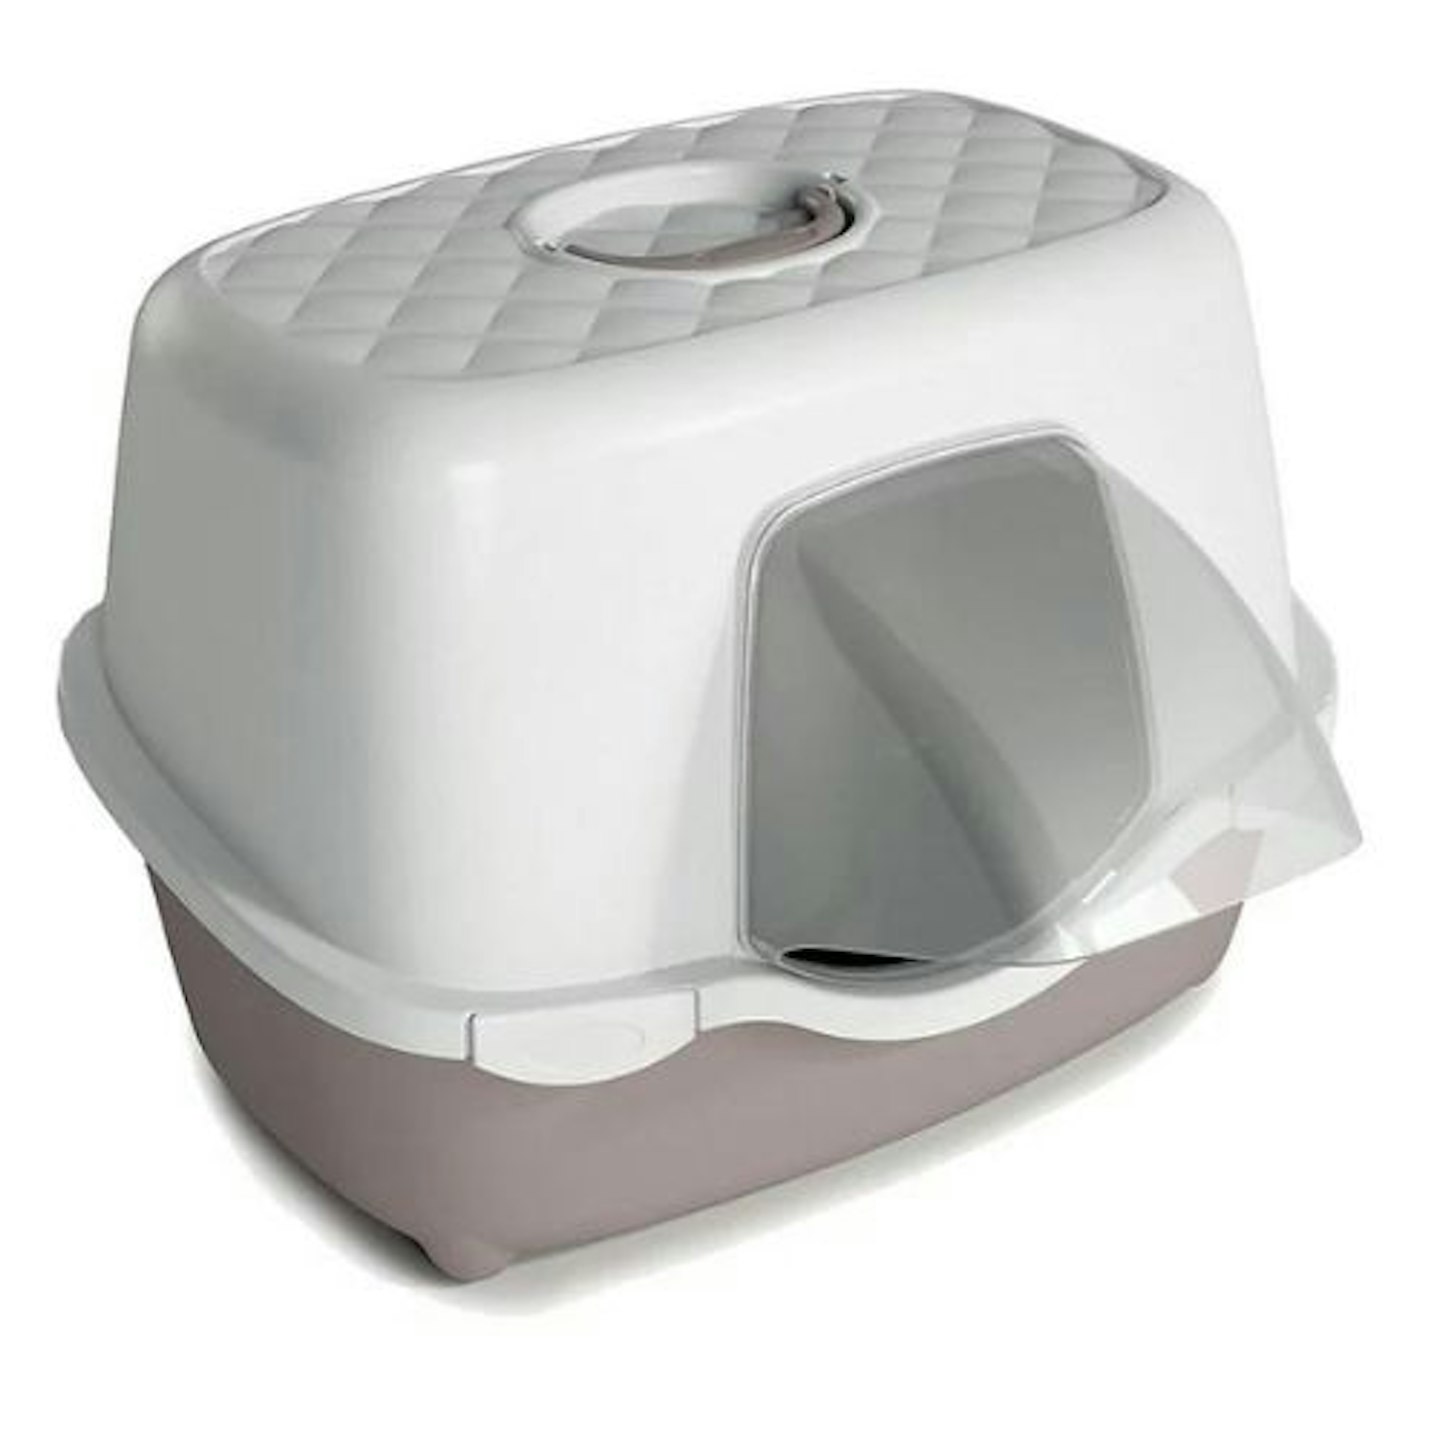 CAT CENTRE Hooded Outdoor Cat Litter Tray